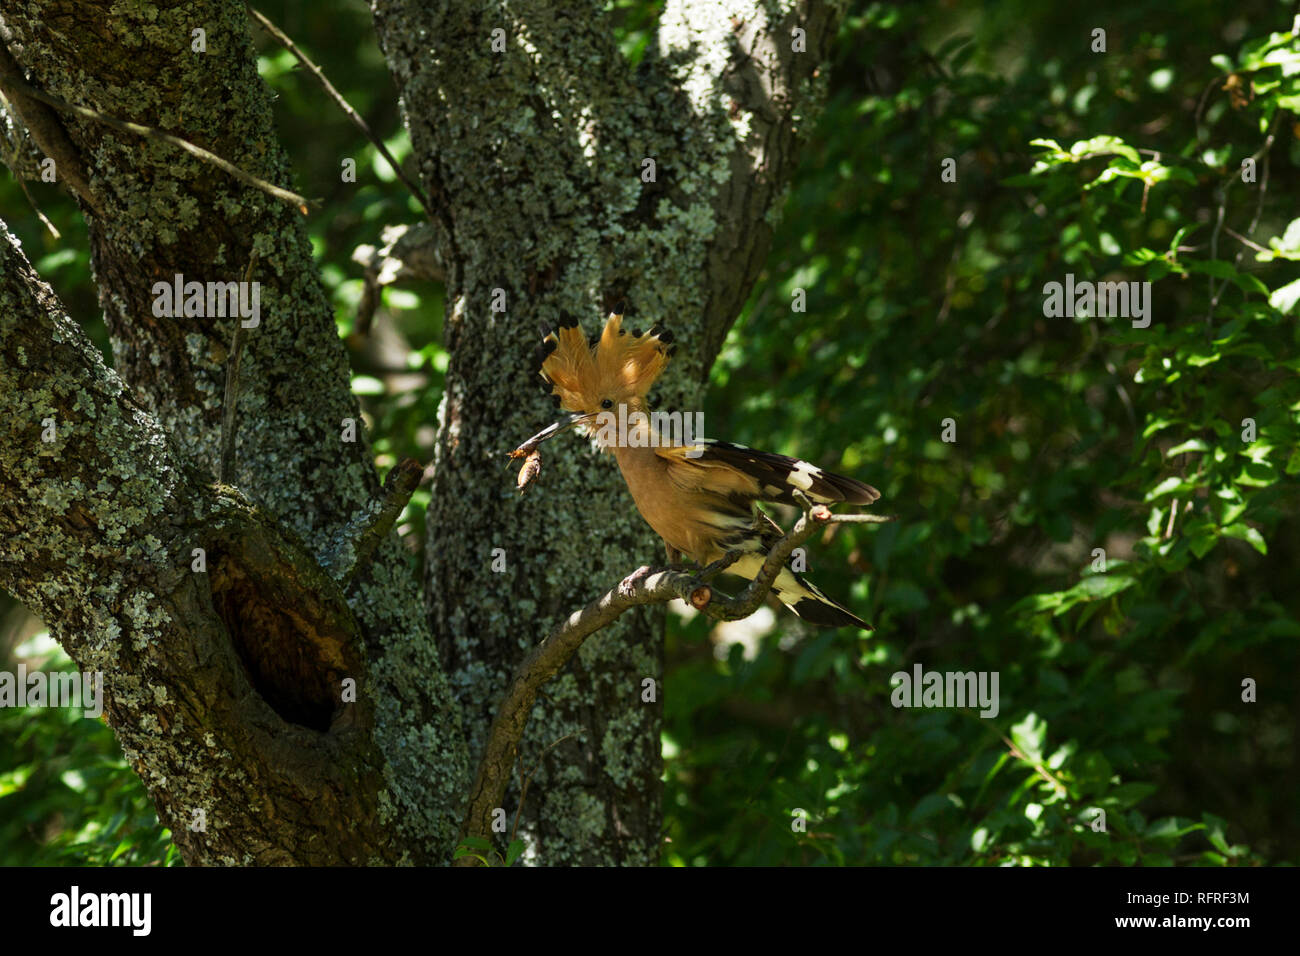 Hoopoe, Latin name Upupa epops, perched on a branch next to its nest with crest raised and a grub in its beak Stock Photo